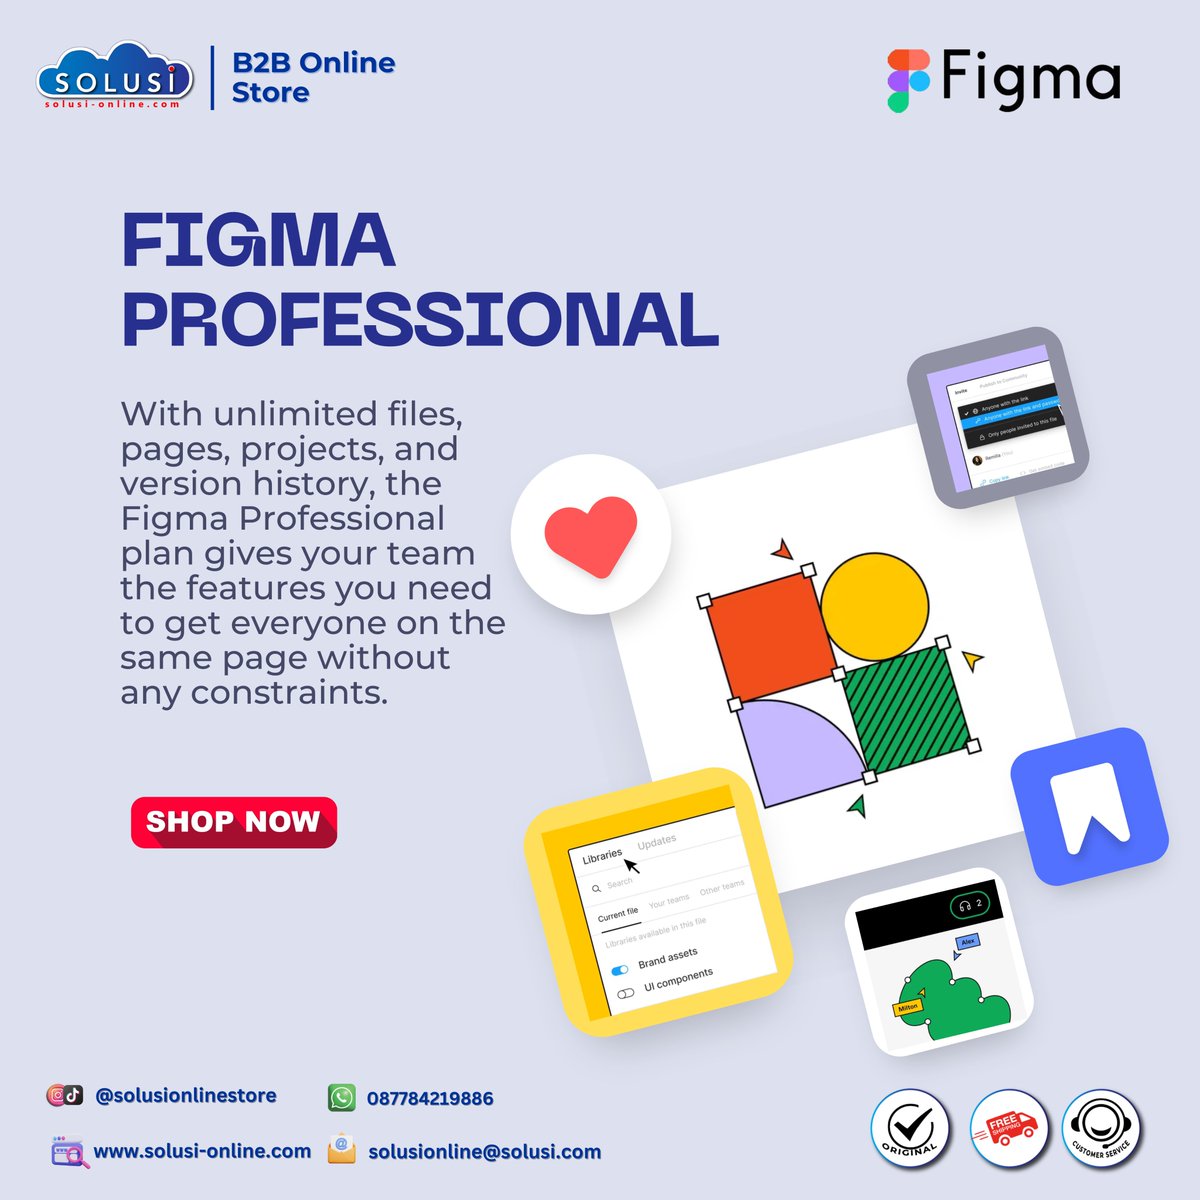 Collaboration without limits! Figma Professional empowers teams to design together seamlessly, with unlimited files, pages, and projects. 💻

Shop Now: solusi-online.com/product/figma-…

#DesignUnleashed #Figma #Murah #Diskon #License #Software #SolusiOnlineStore #B2BOnlineStore